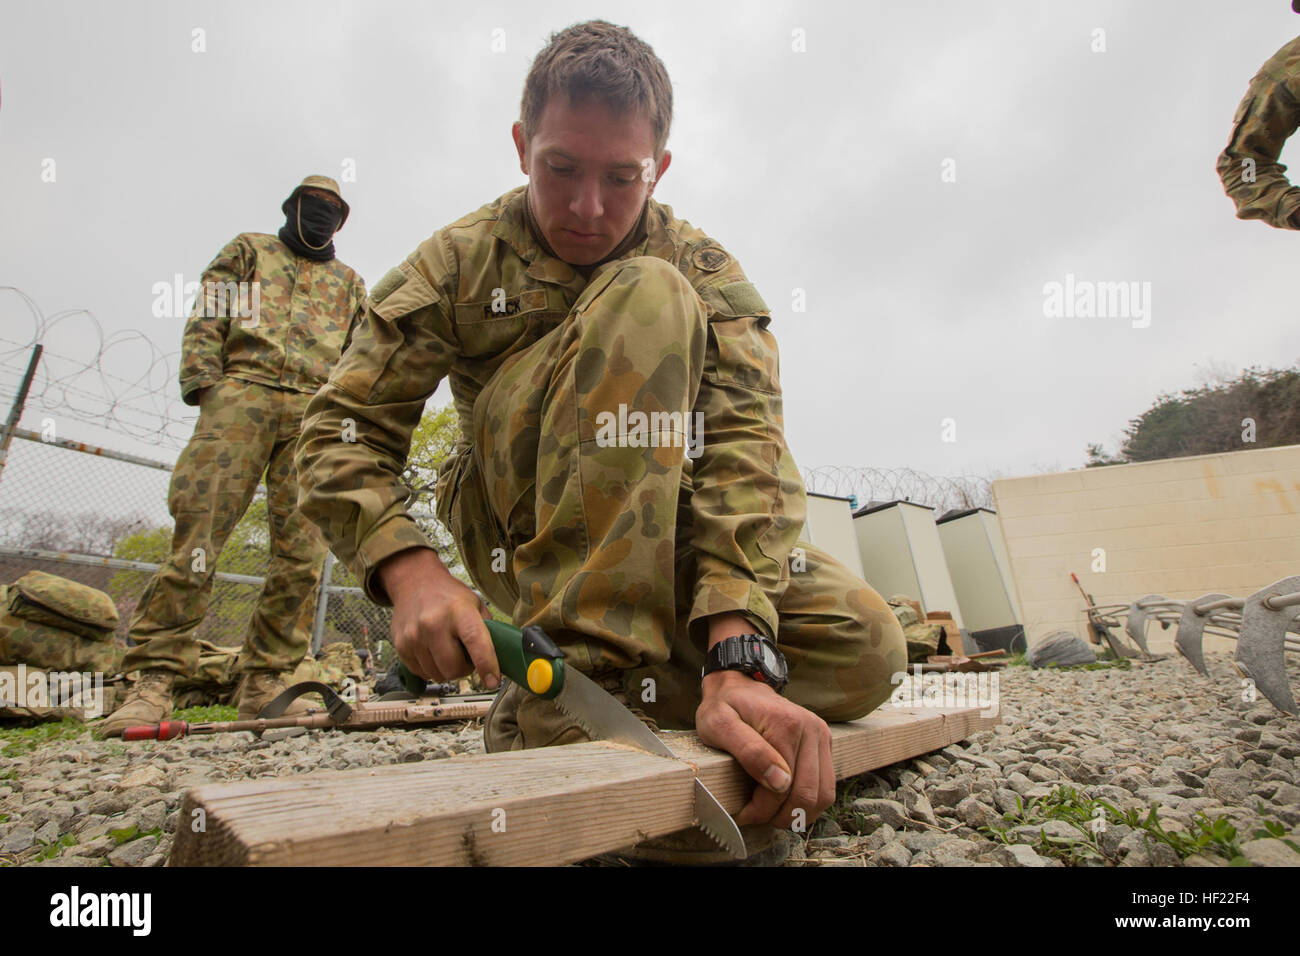 Royal Australian Army Sapper Tim Flack, Combat Engineer, with 2nd Combat Engineer Regiment, 7th Brigade, saws a piece of wood to construct a make shift bridge in order to hone engineering skills, during Exercise Ssang Yong 14 at Ranger Training Site, Pohang, South Korea, April 3, 2014. Exercise Ssang Yong 14 is conducted annually in the Republic of Korea (ROK) to enhance interoperability between U.S. and ROK forces by performing a full spectrum of amphibious operations while showcasing sea-based power projection in the Pacific. (U.S. Marine Corps Photo by Lance Cpl. Tyler S. Dietrich/ Released Stock Photo